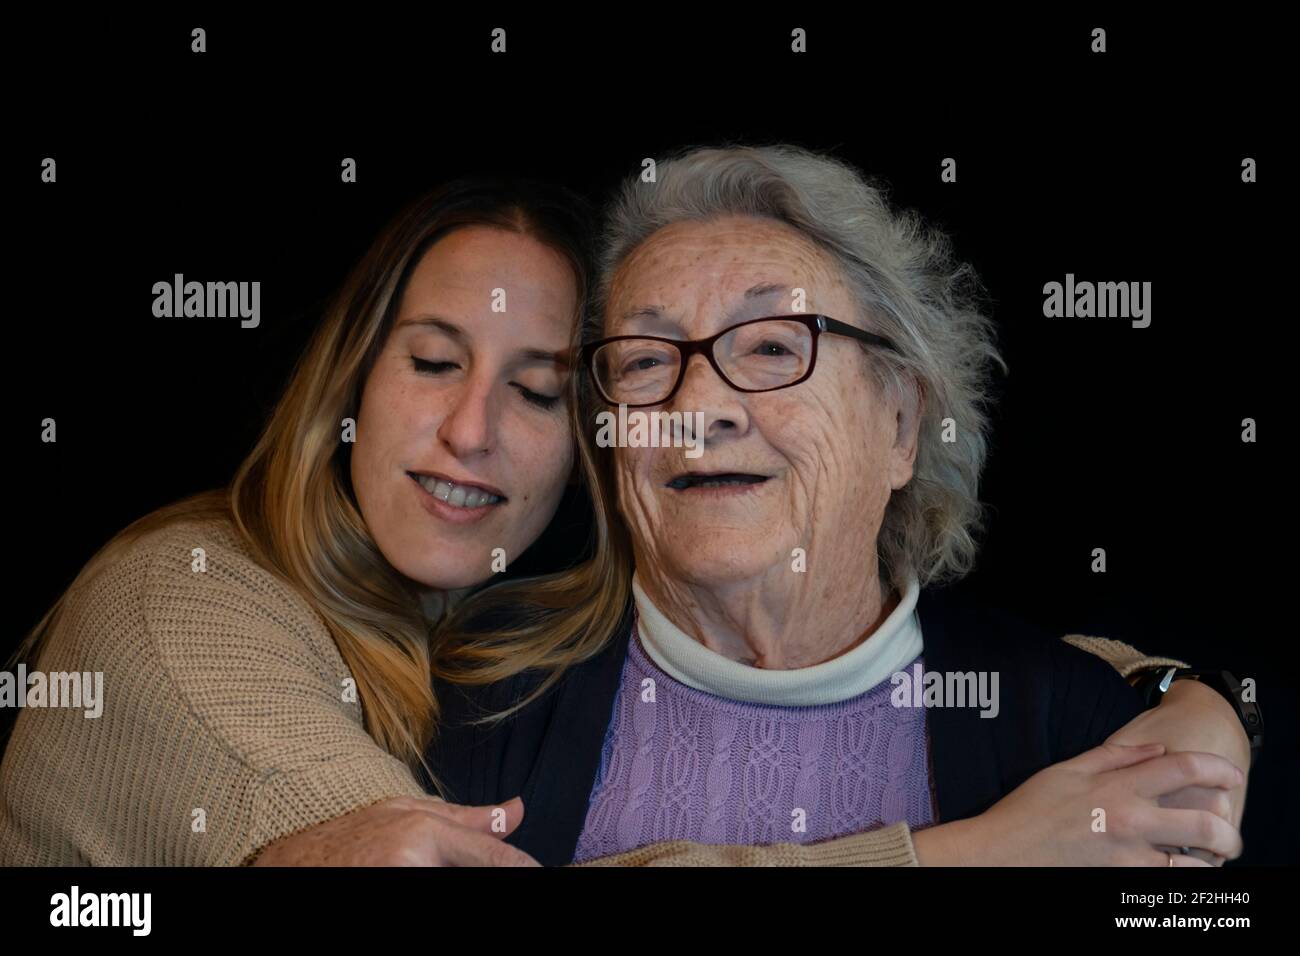 Family lifestyle portrait of elderly 80s woman hugging young grand daughter Stock Photo